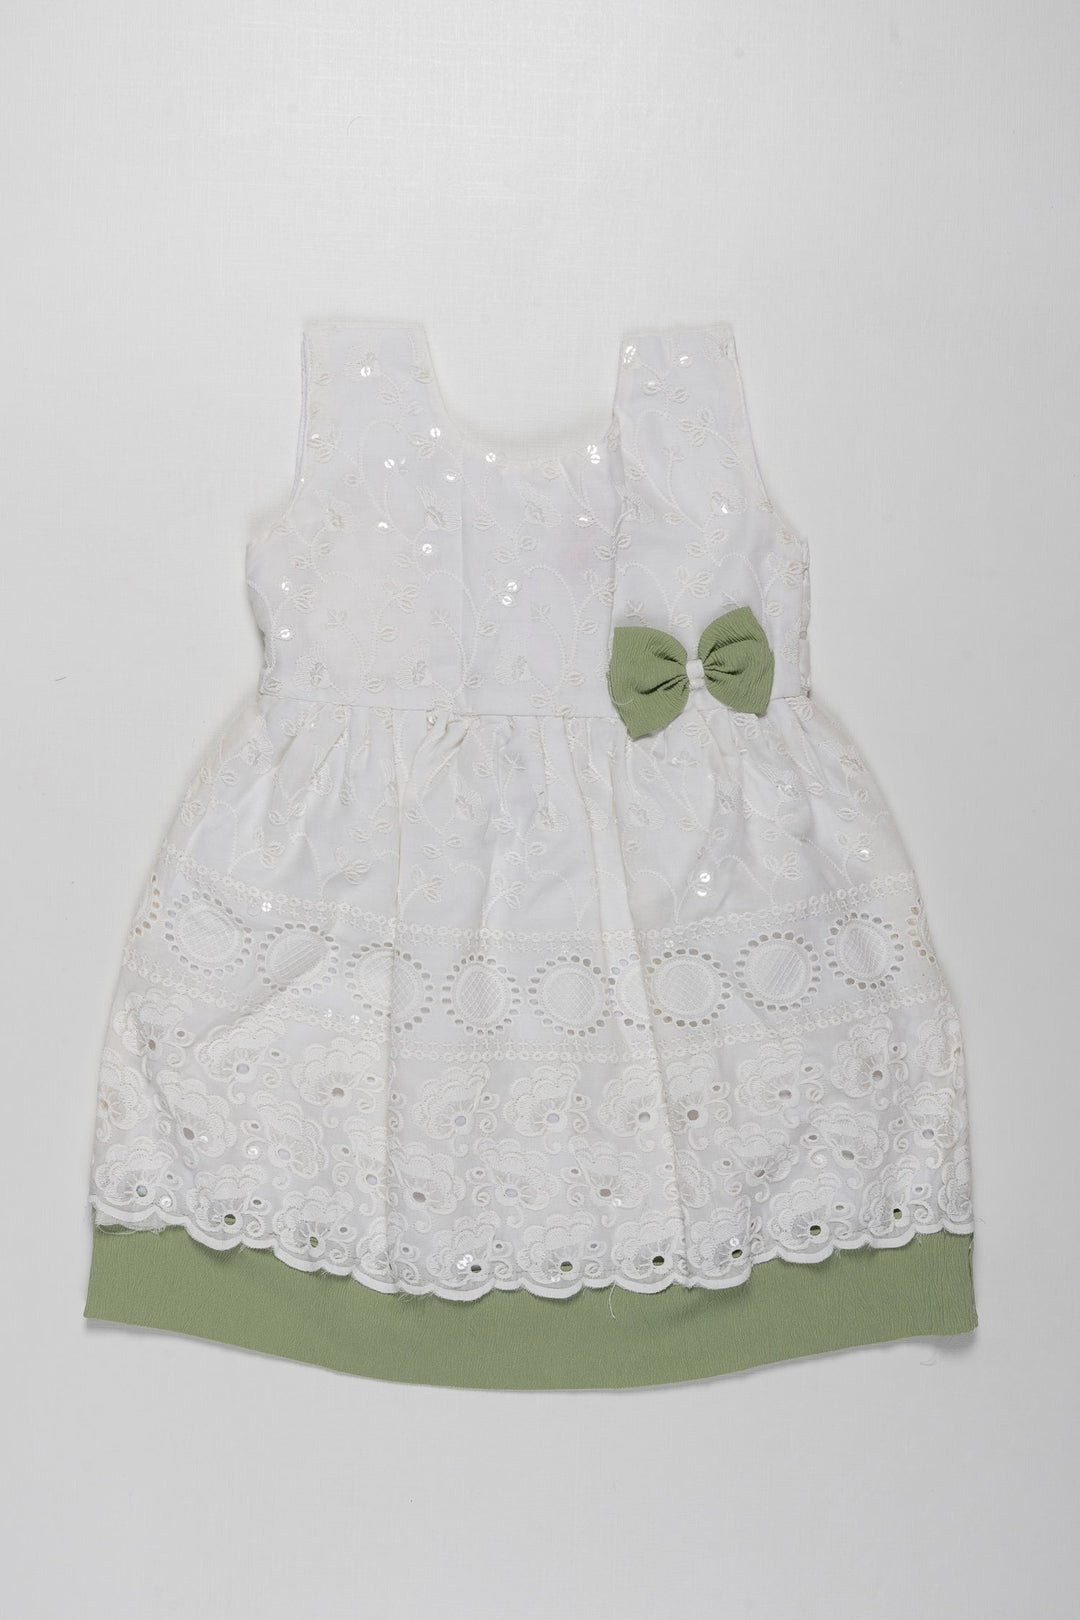 The Nesavu Girls Cotton Frock Girls Ethereal Chikan Embroidered Cotton Frock with Delicate Lace Trim Nesavu 20 (3Y) / Green / Cotton GFC1284A-20 Chikan Embroidered Cotton Frocks for Girls | Timeless Elegance | The Nesavu